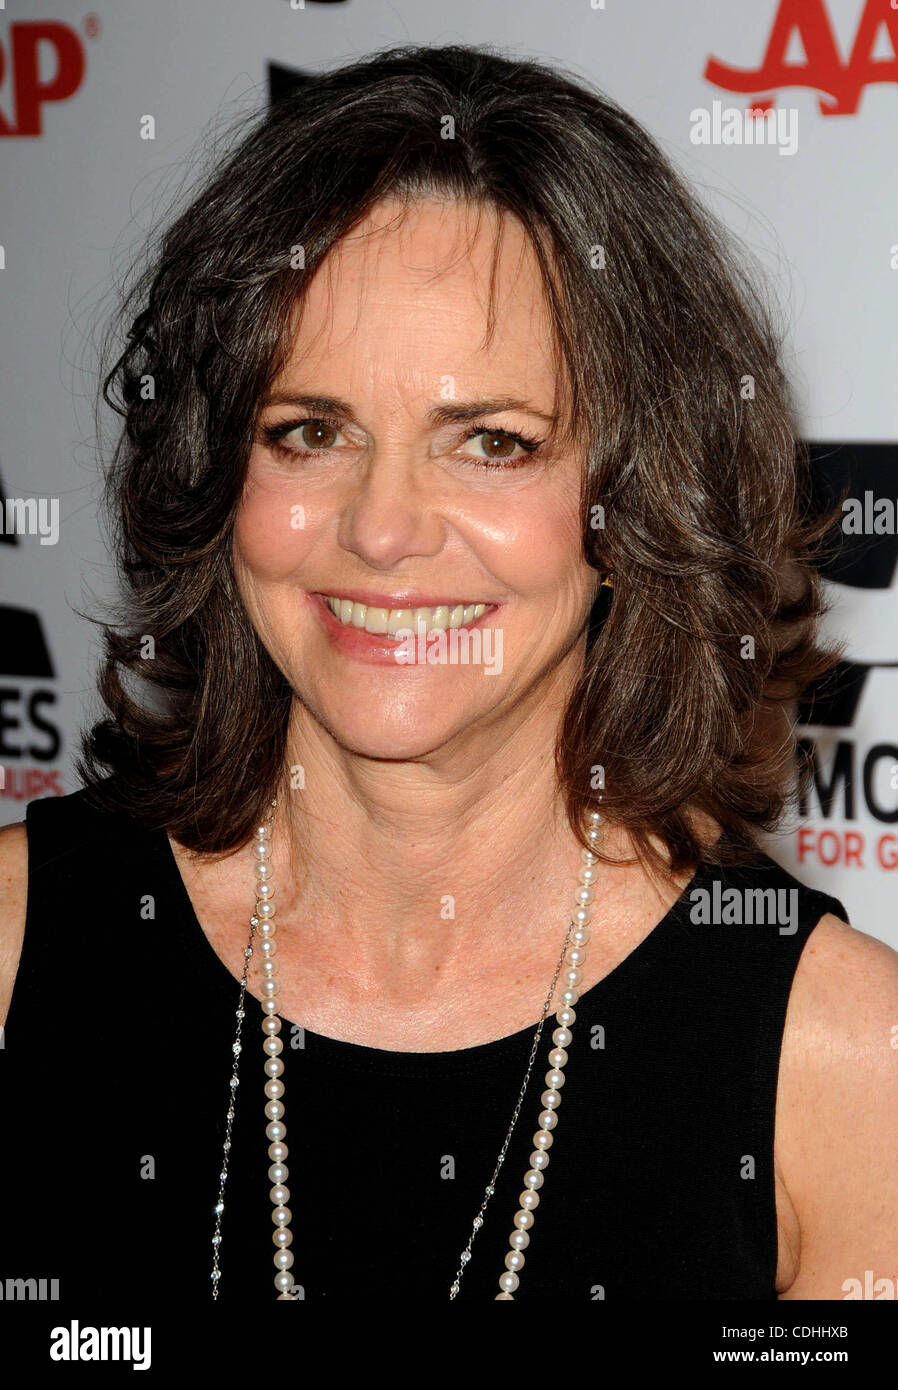 Feb. 7, 2011 - Los Angeles, California, U.S. - Sally Fields Attending The 10th Annual Movies For Grownups Awards Gala Held At The Beverly Wilshire Hotel in Beverly Hills, California On 2/7/11. 2011.K67525LONG(Credit Image: Â© D. Long/Globe Photos/ZUMAPRESS.com) Stock Photo